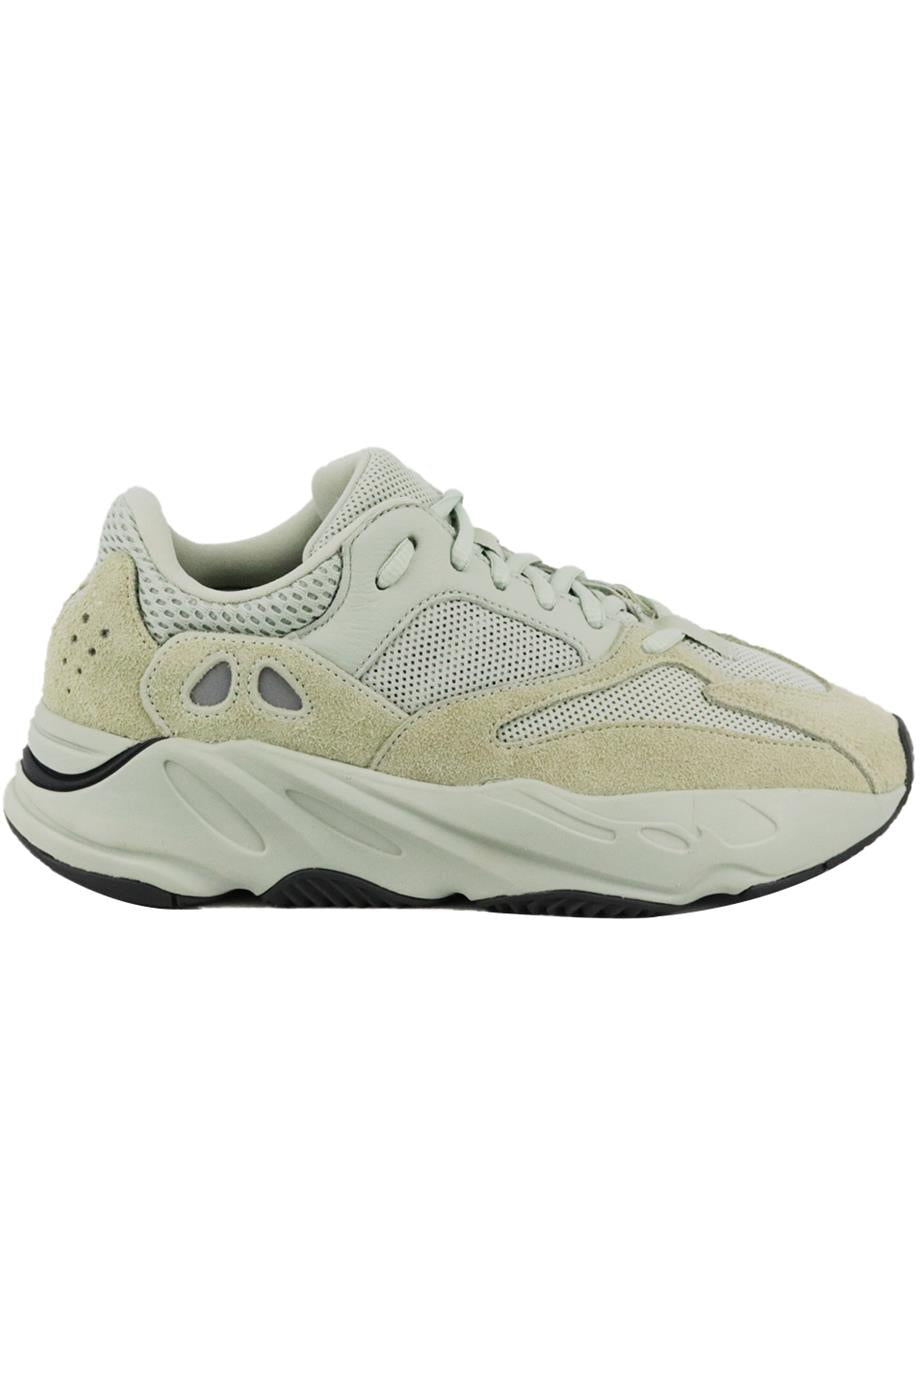 ADIDAS YEEZY BOOST 700 V1 MESH AND SUEDE SNEAKERS EU 39 UK 6 US 6.5